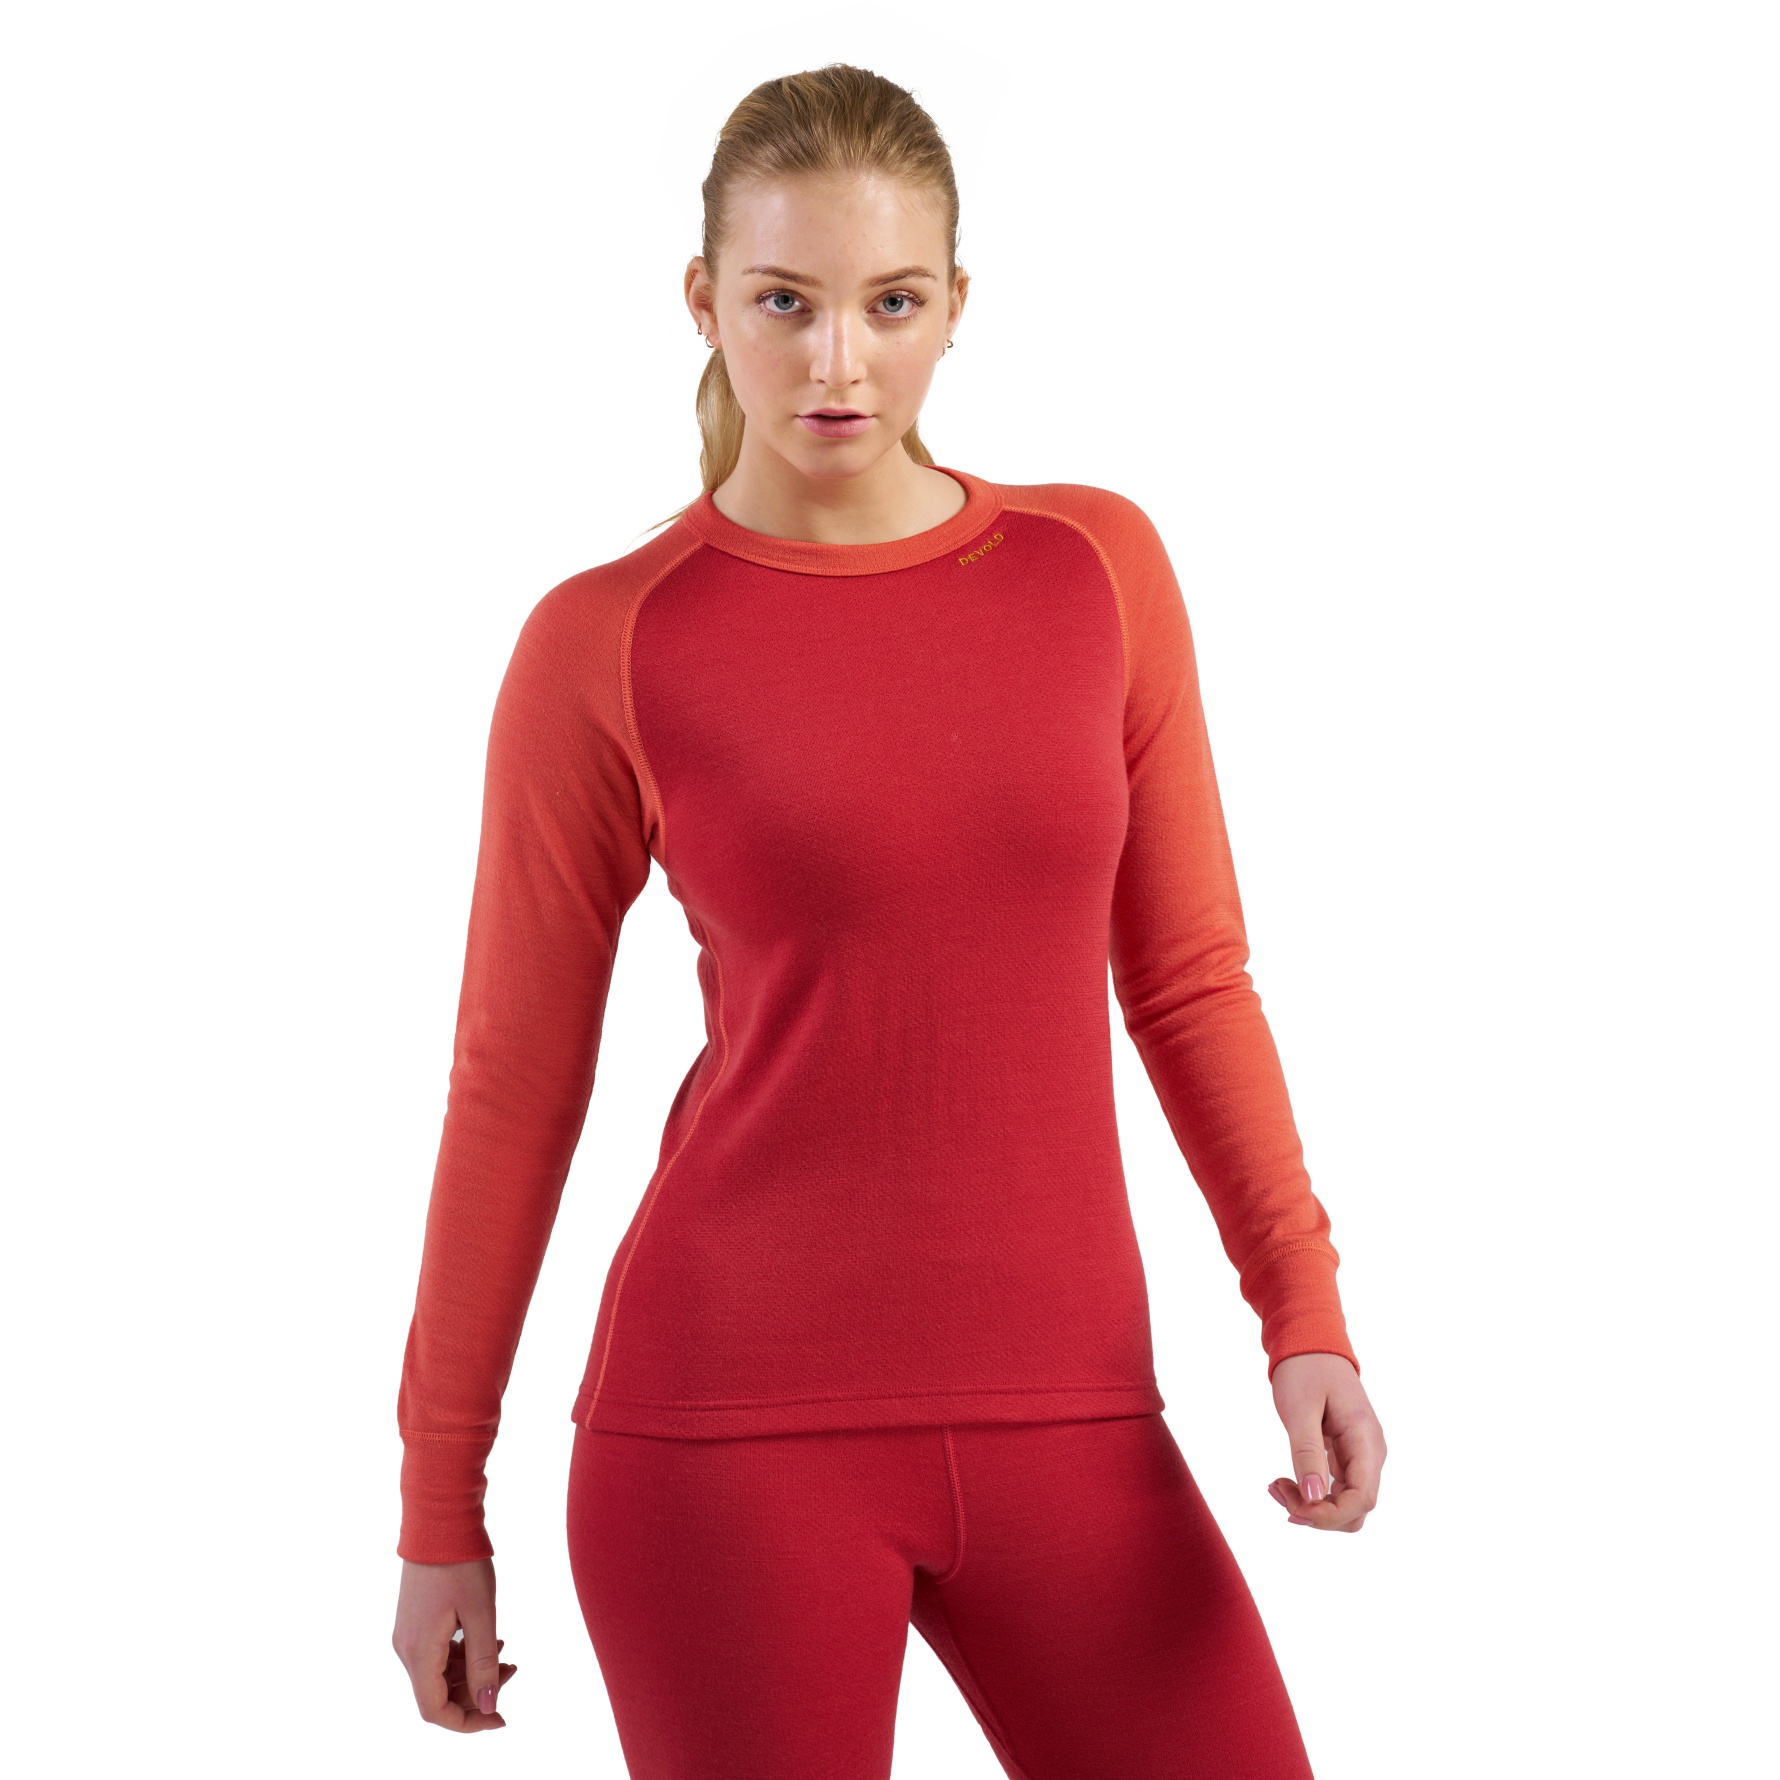 Image of Devold Expedition Merino 235 Shirt Women - 164 Beauty/Coral